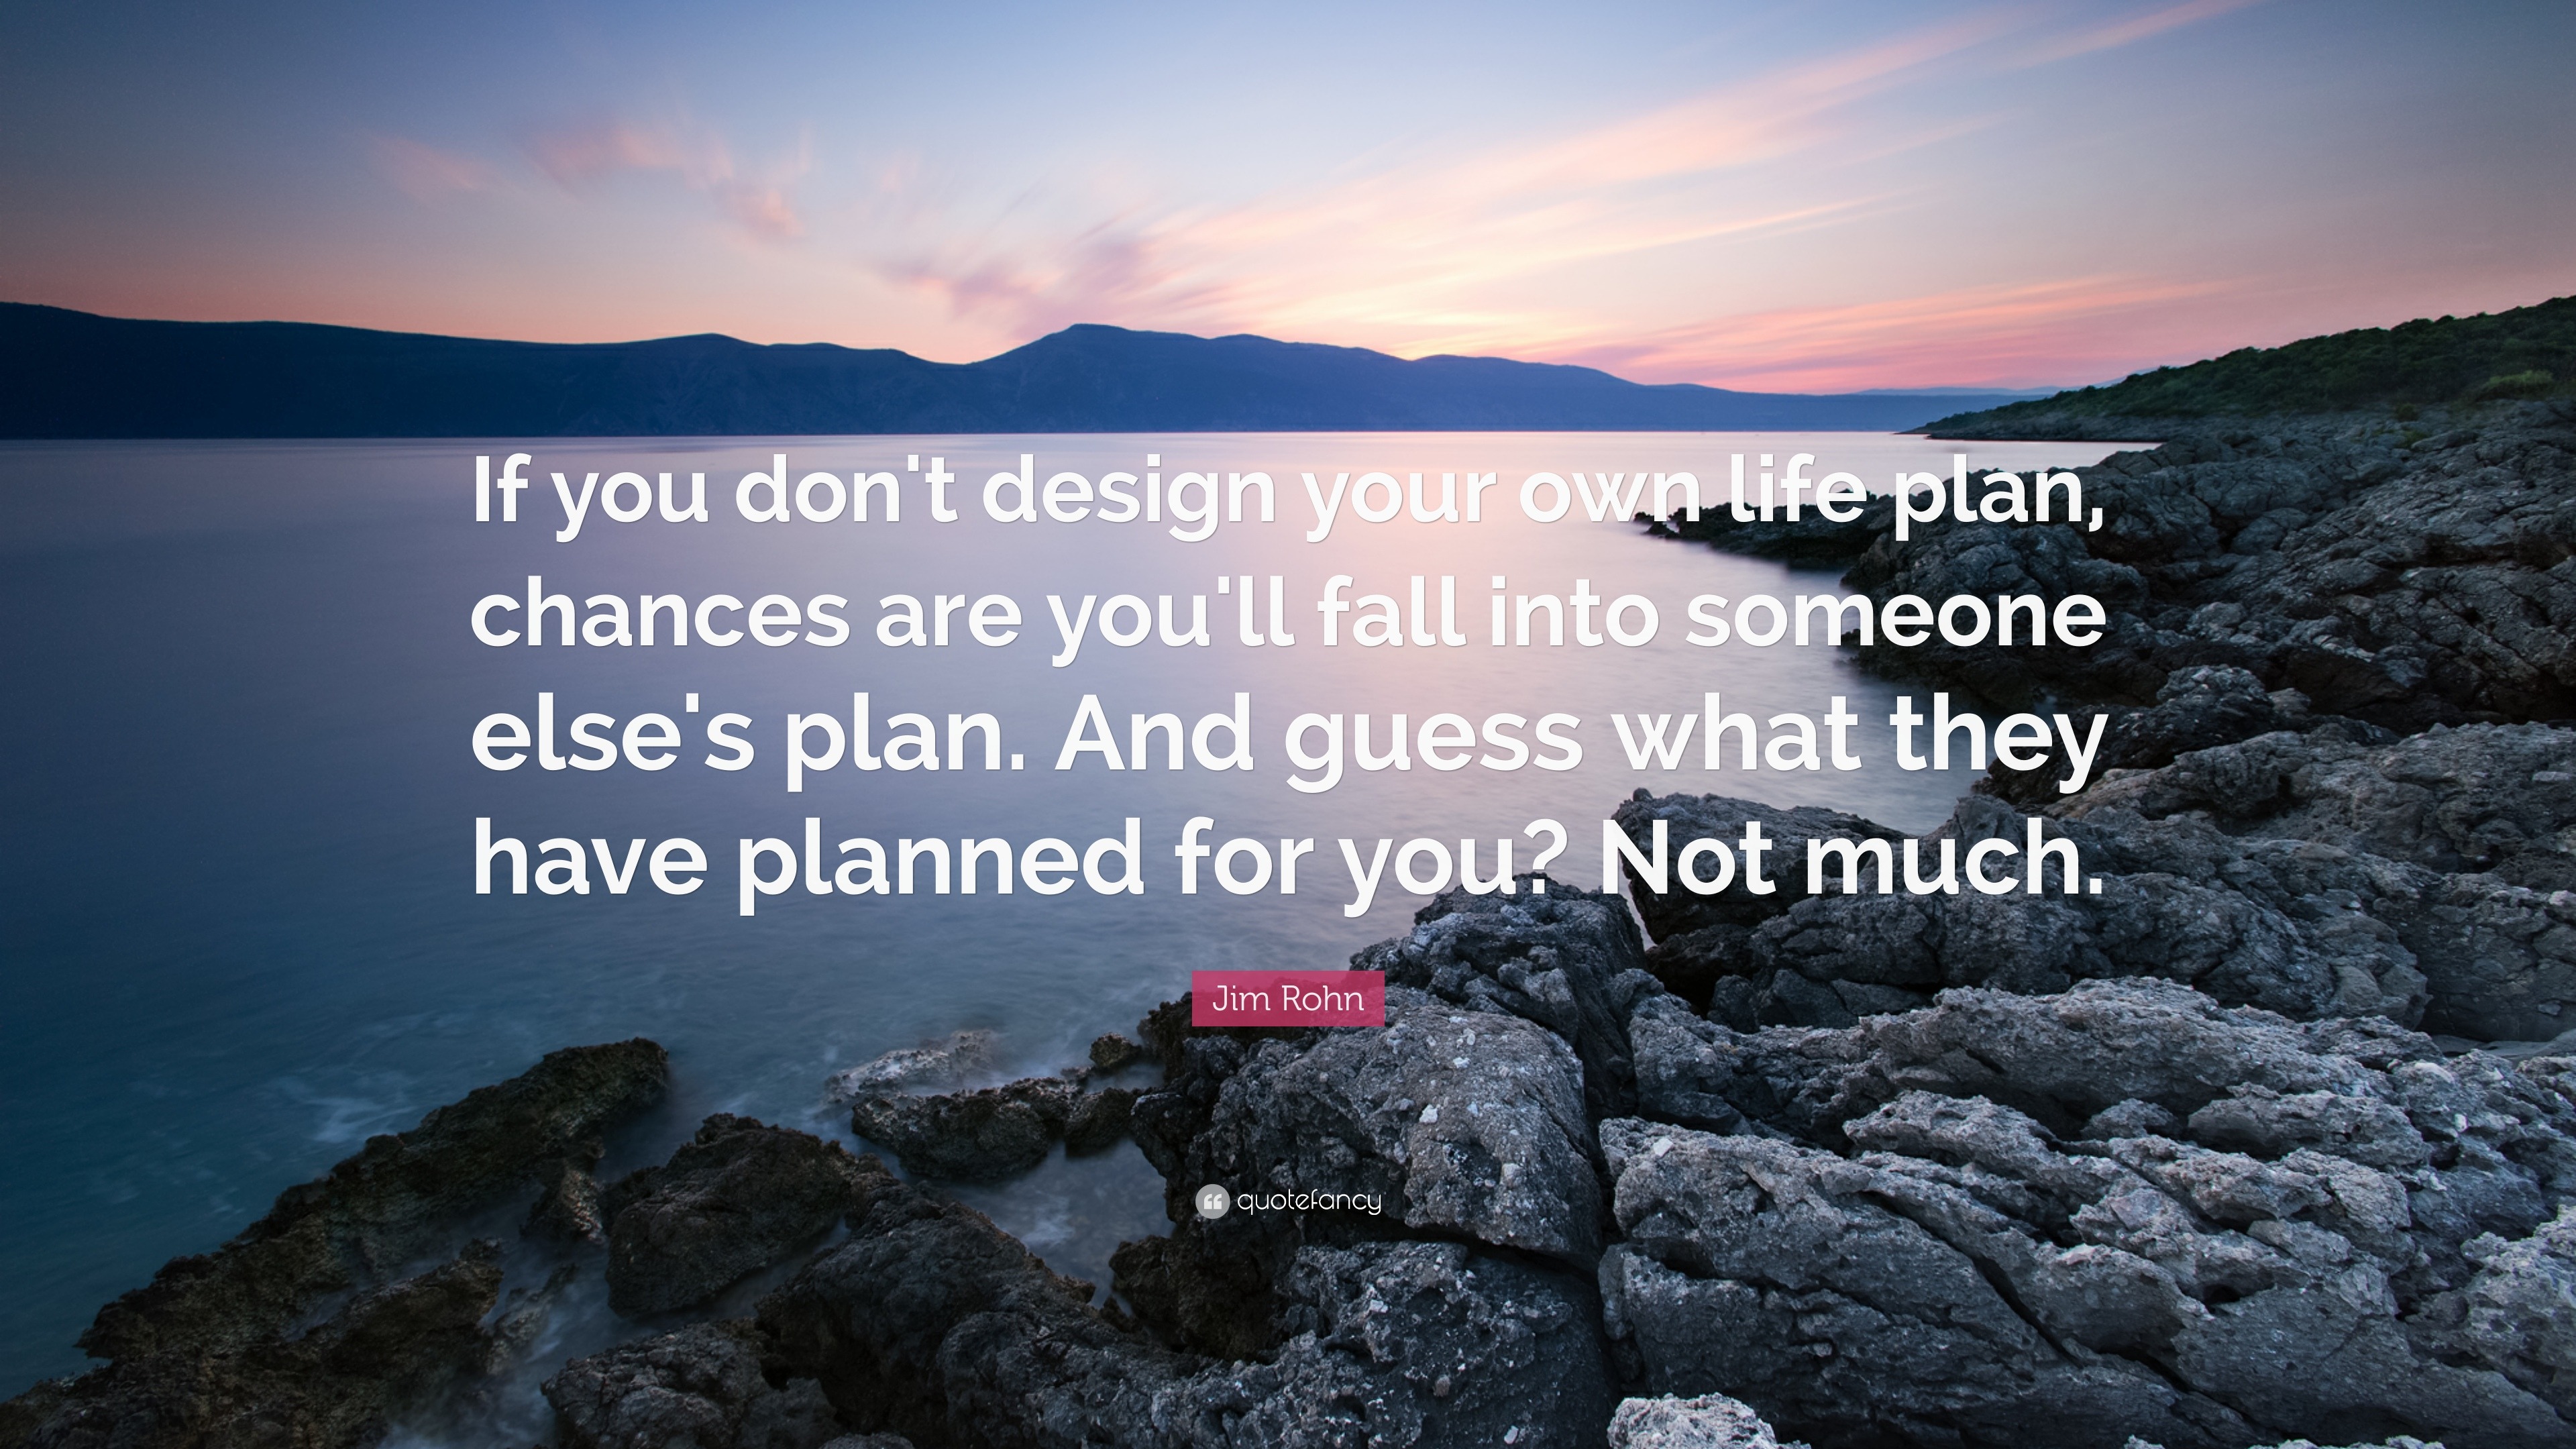 Jim Rohn Quote: "If you don't design your own life plan ...